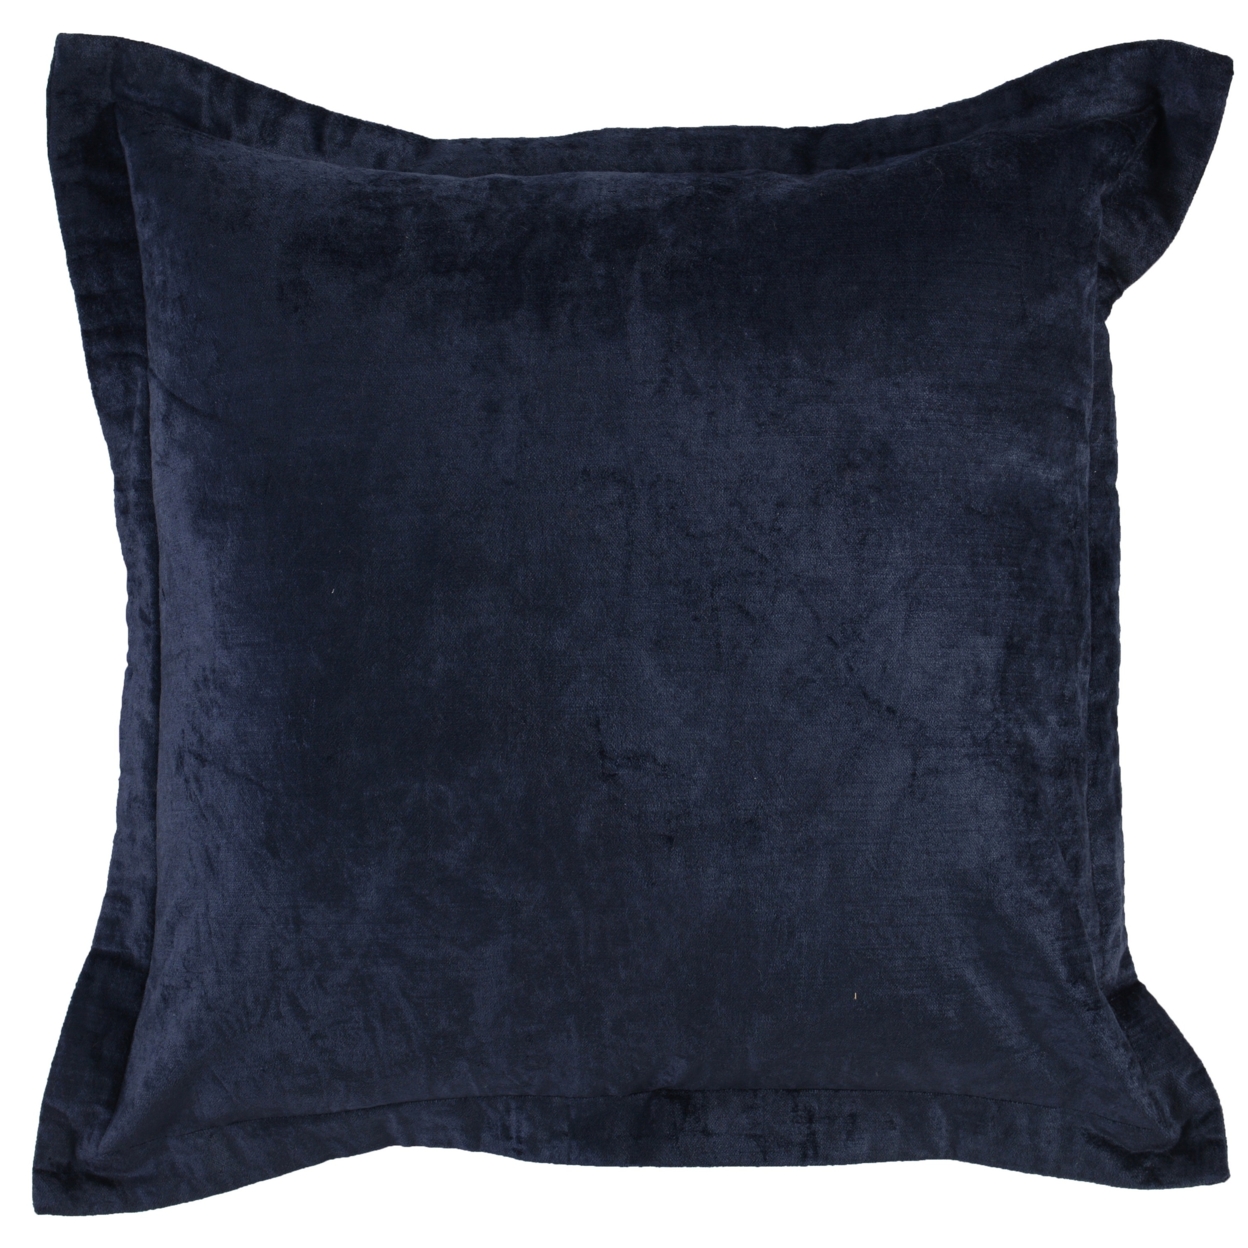 Square Fabric Throw Pillow With Solid Color And Flanged Edges, Blue- Saltoro Sherpi